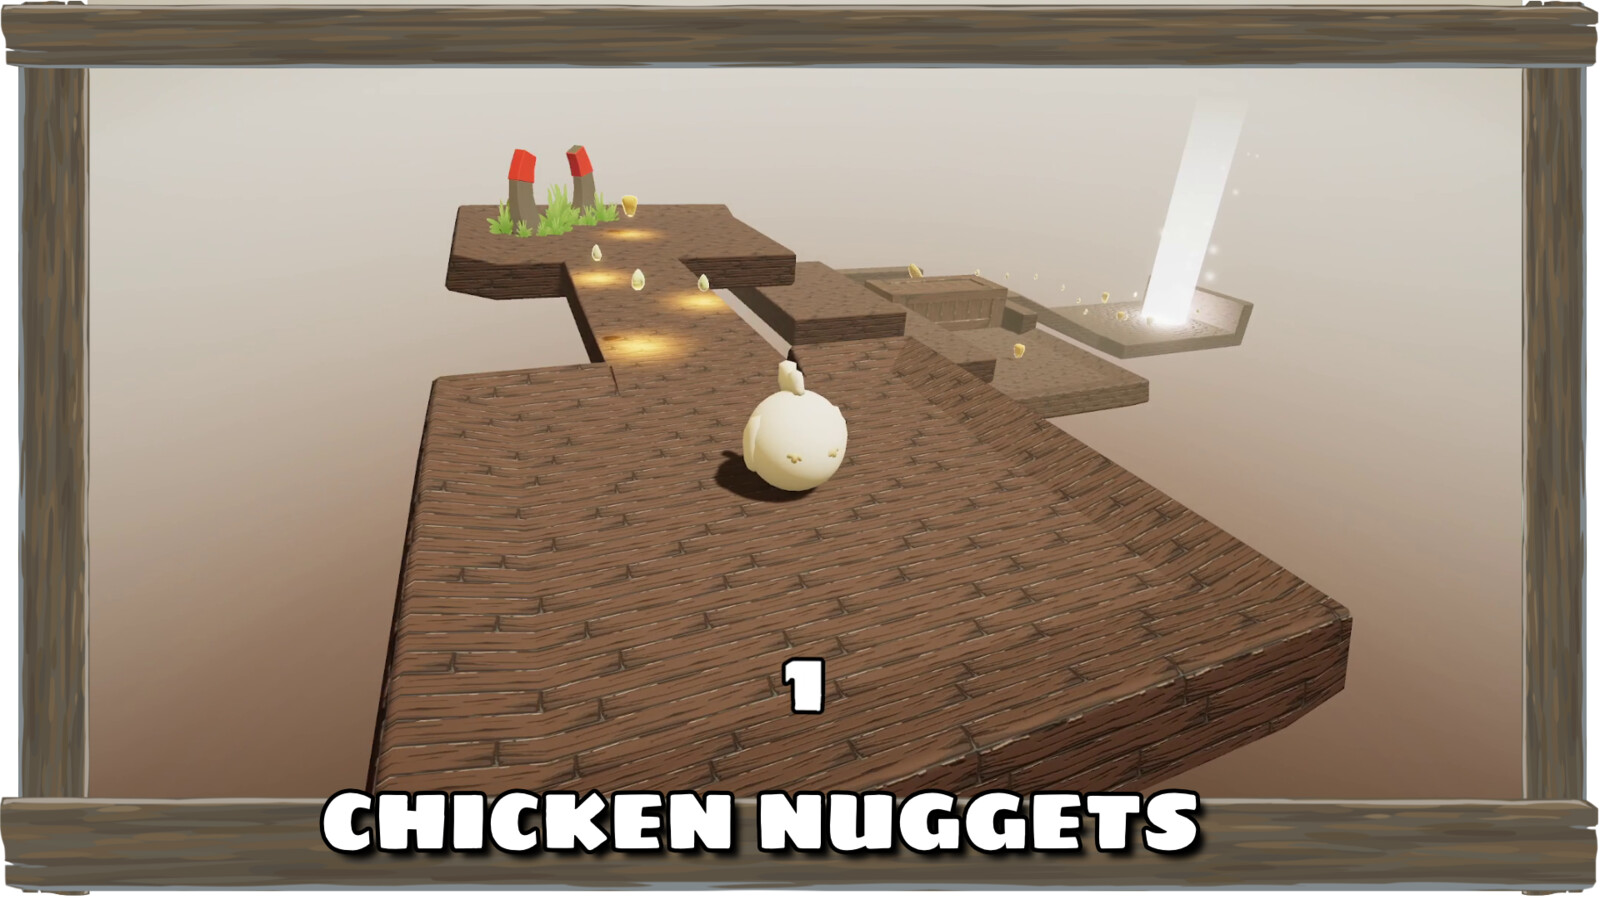 Cn early level in Chicken Nuggets